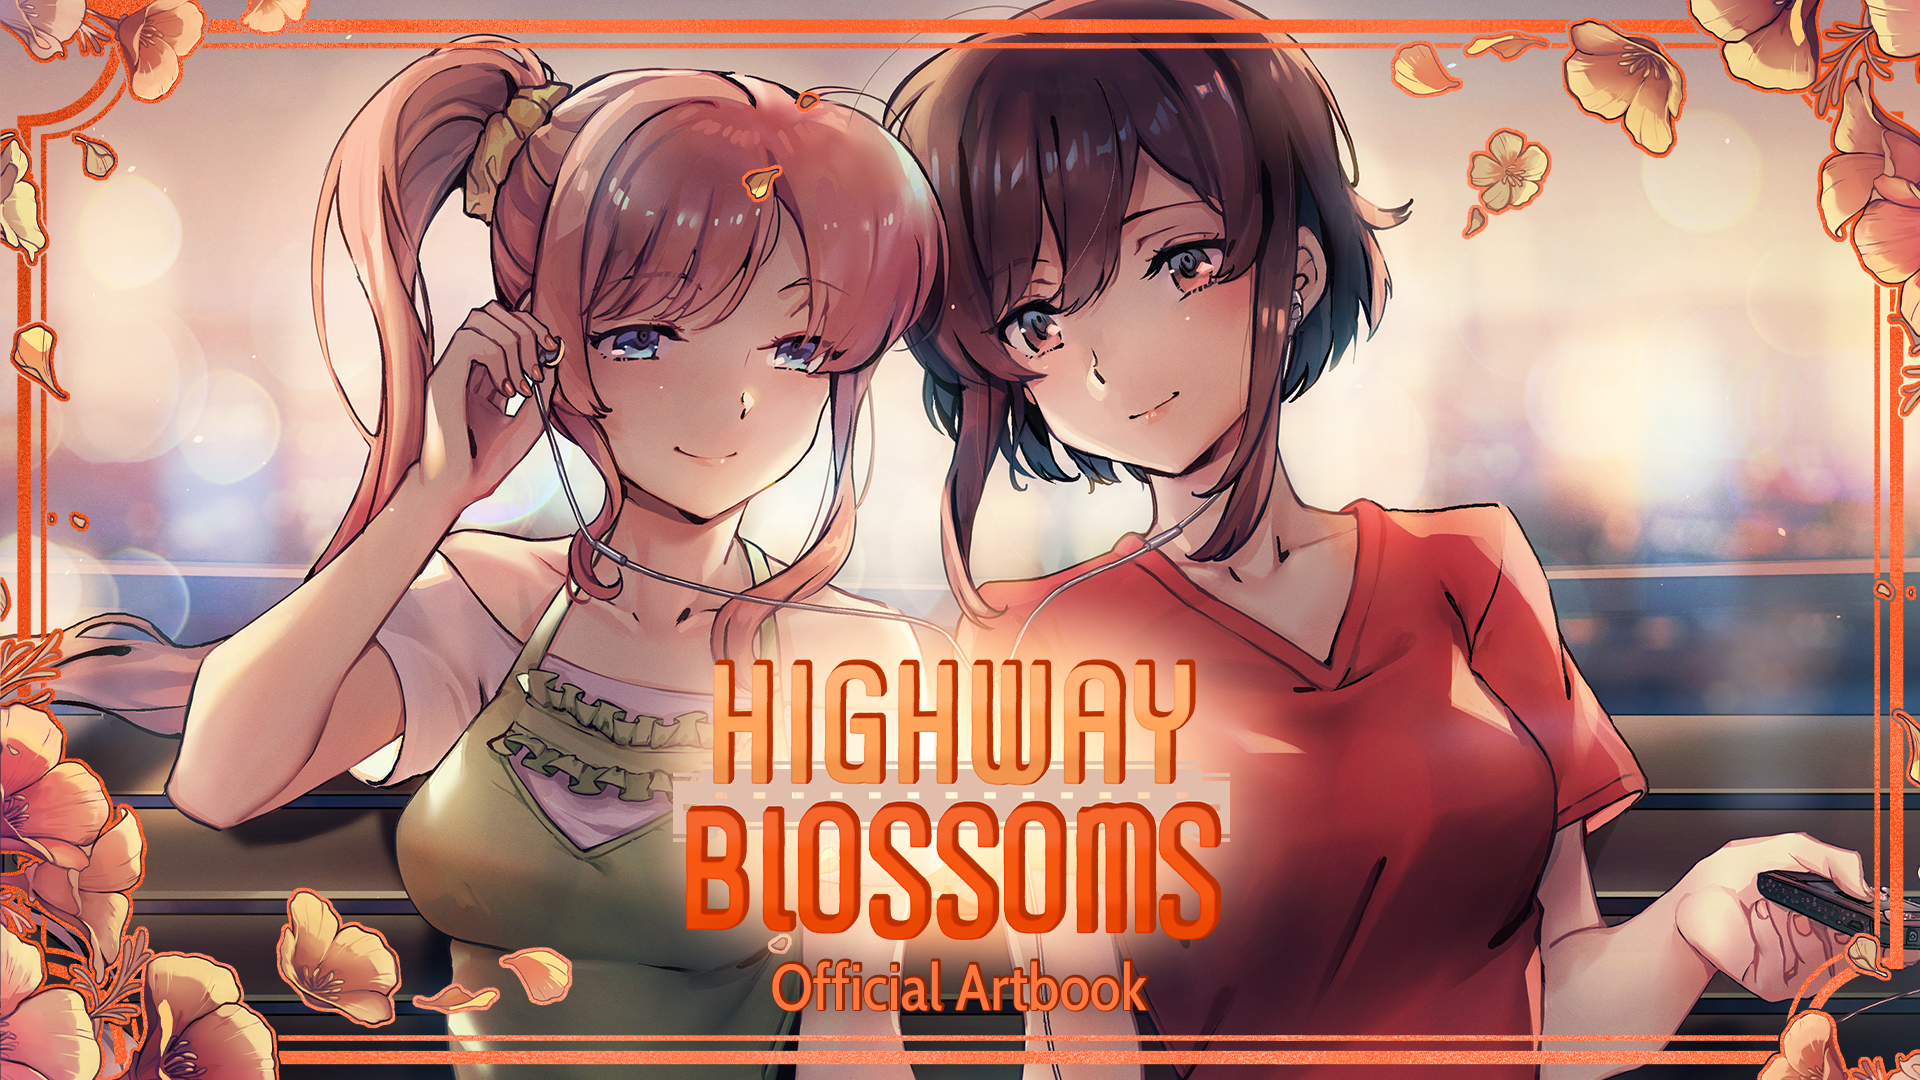 Highway Blossoms Hd Wallpapers